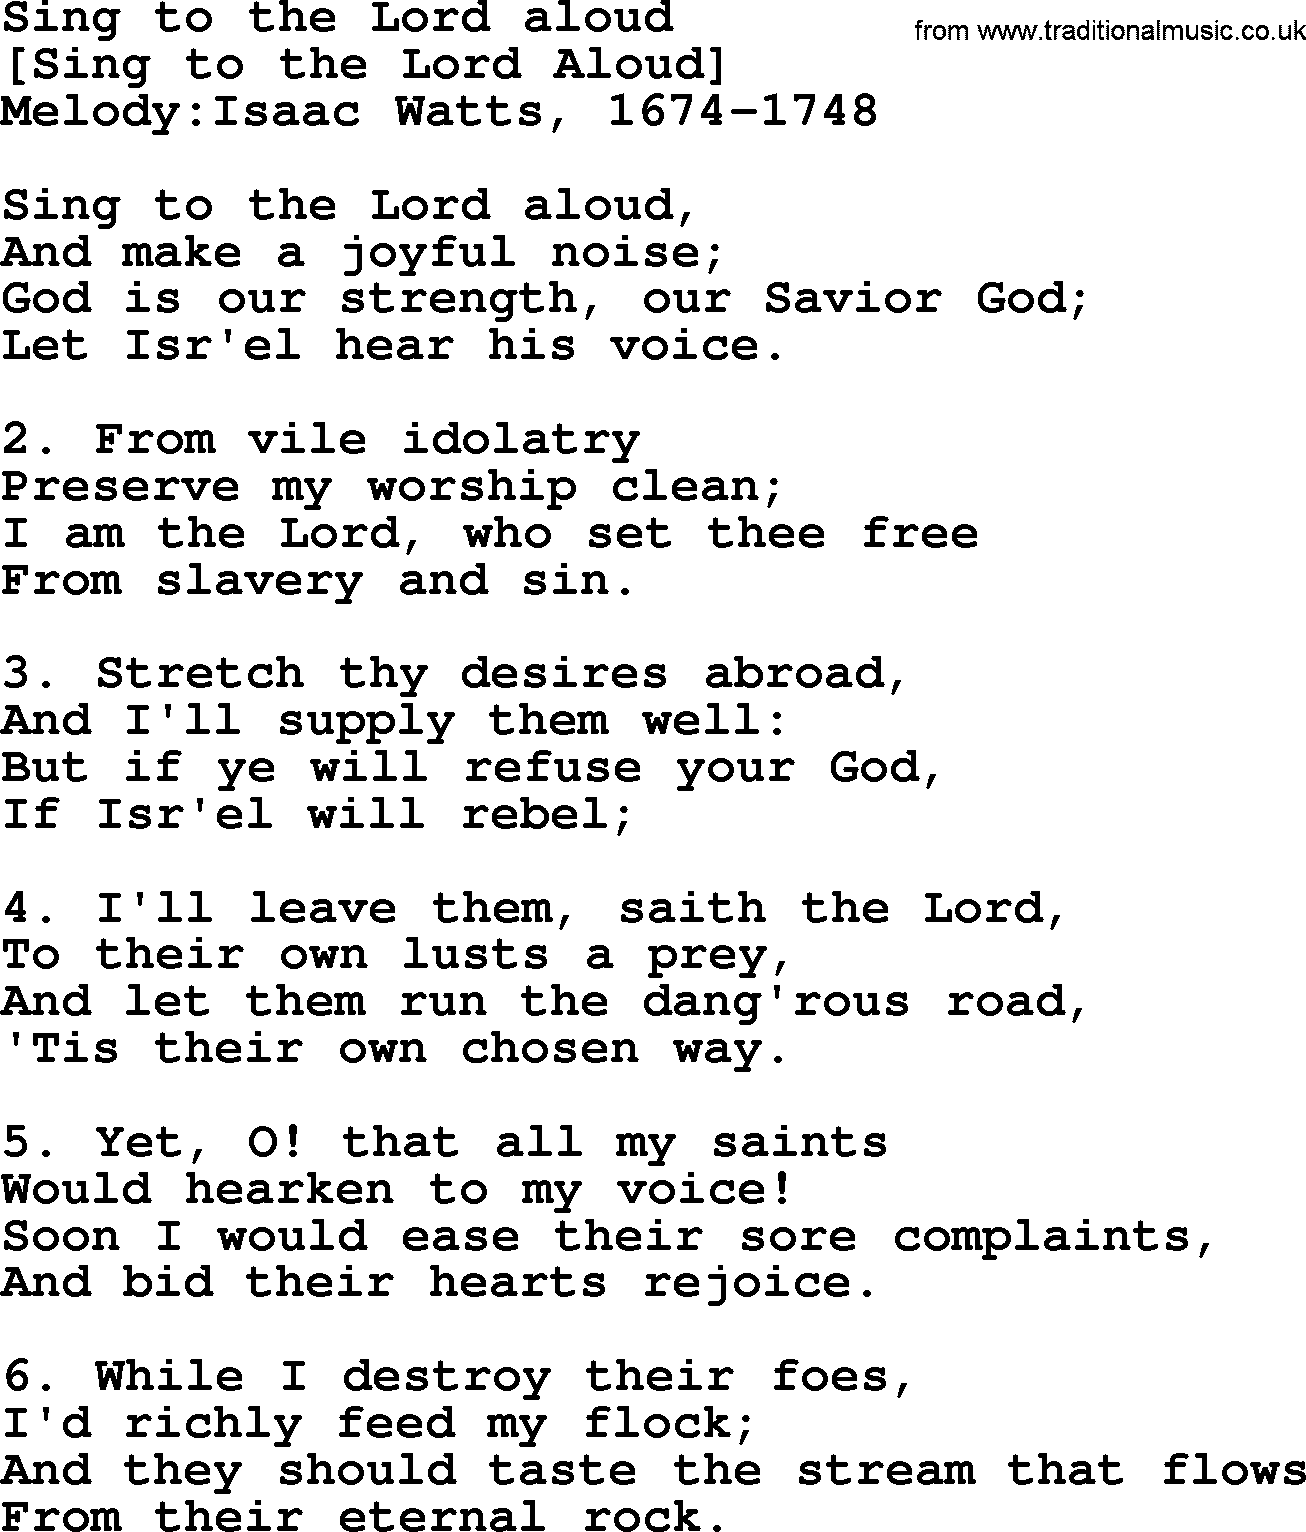 Old English Song: Sing To The Lord Aloud lyrics